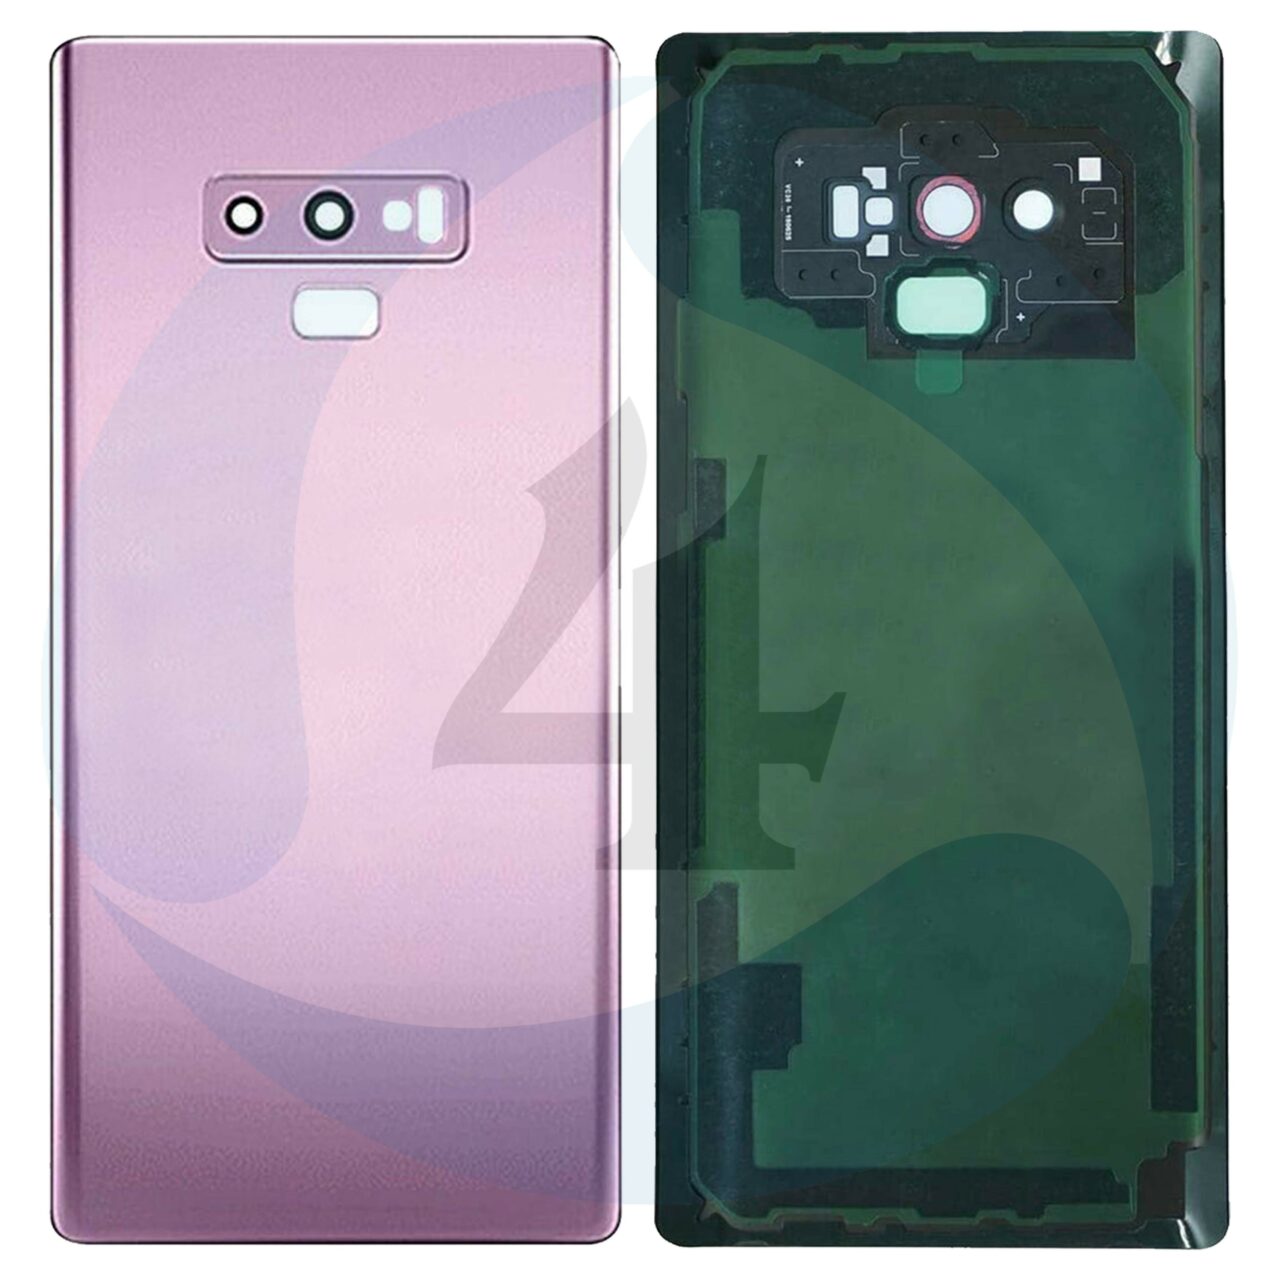 Replacement for samsung galaxy note 9 sm n960 back cover purple